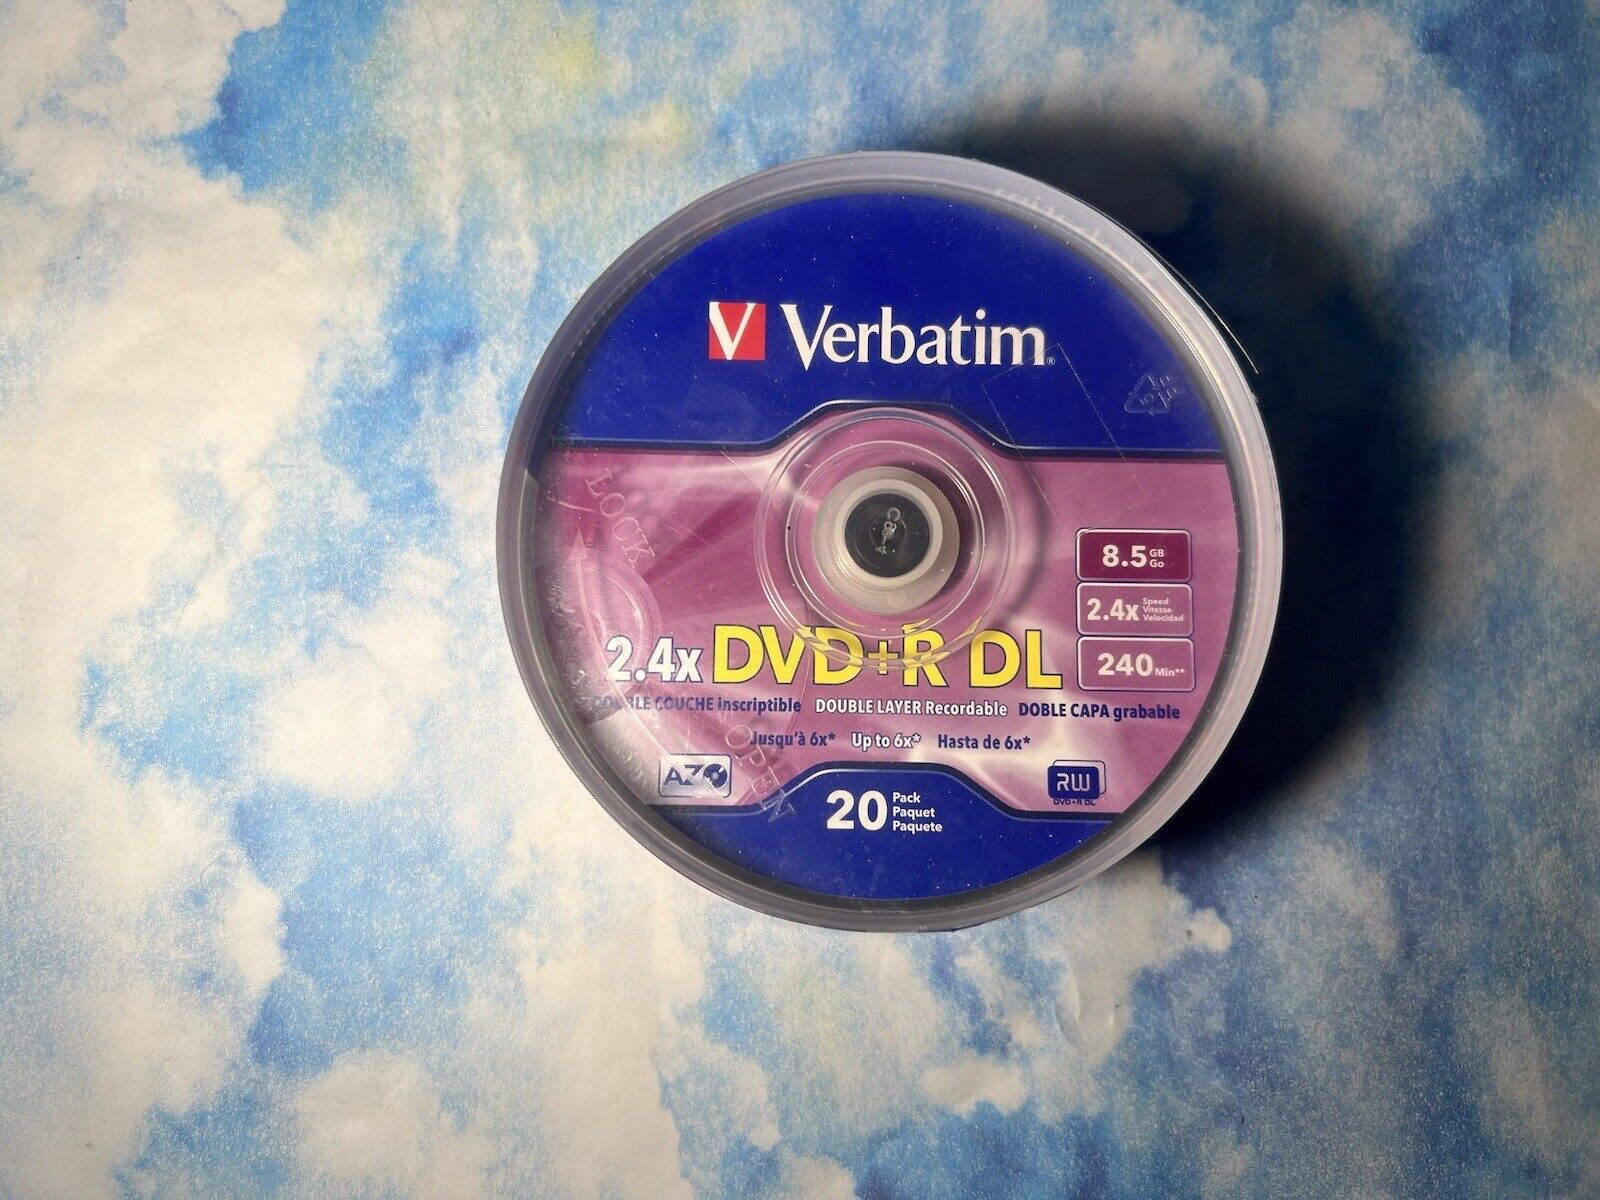 Verbatim DVD+R DL 2.4x 8.5 GB Double Layer Recordable (18 Pack)